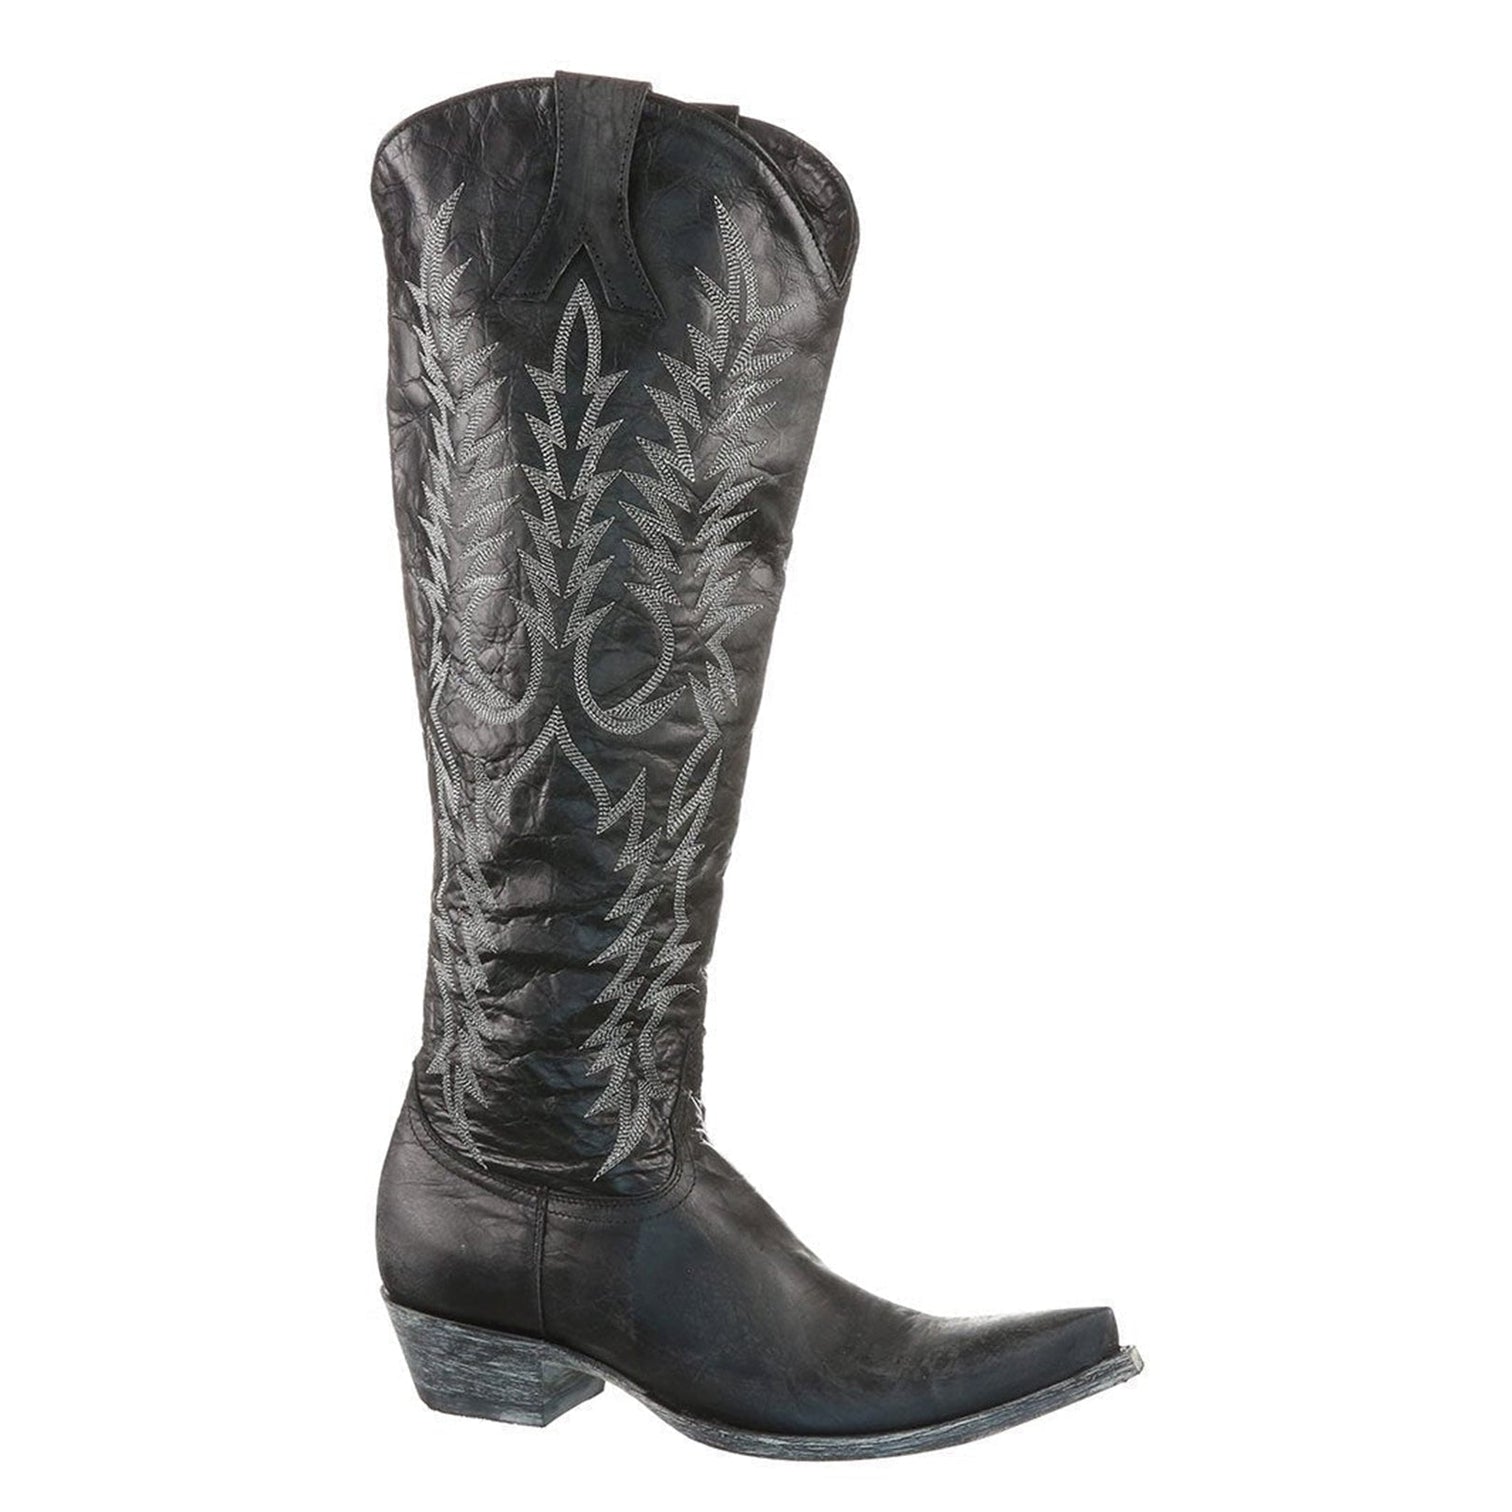 Women's Cowboy Boots & Booties | Old Gringo Boots